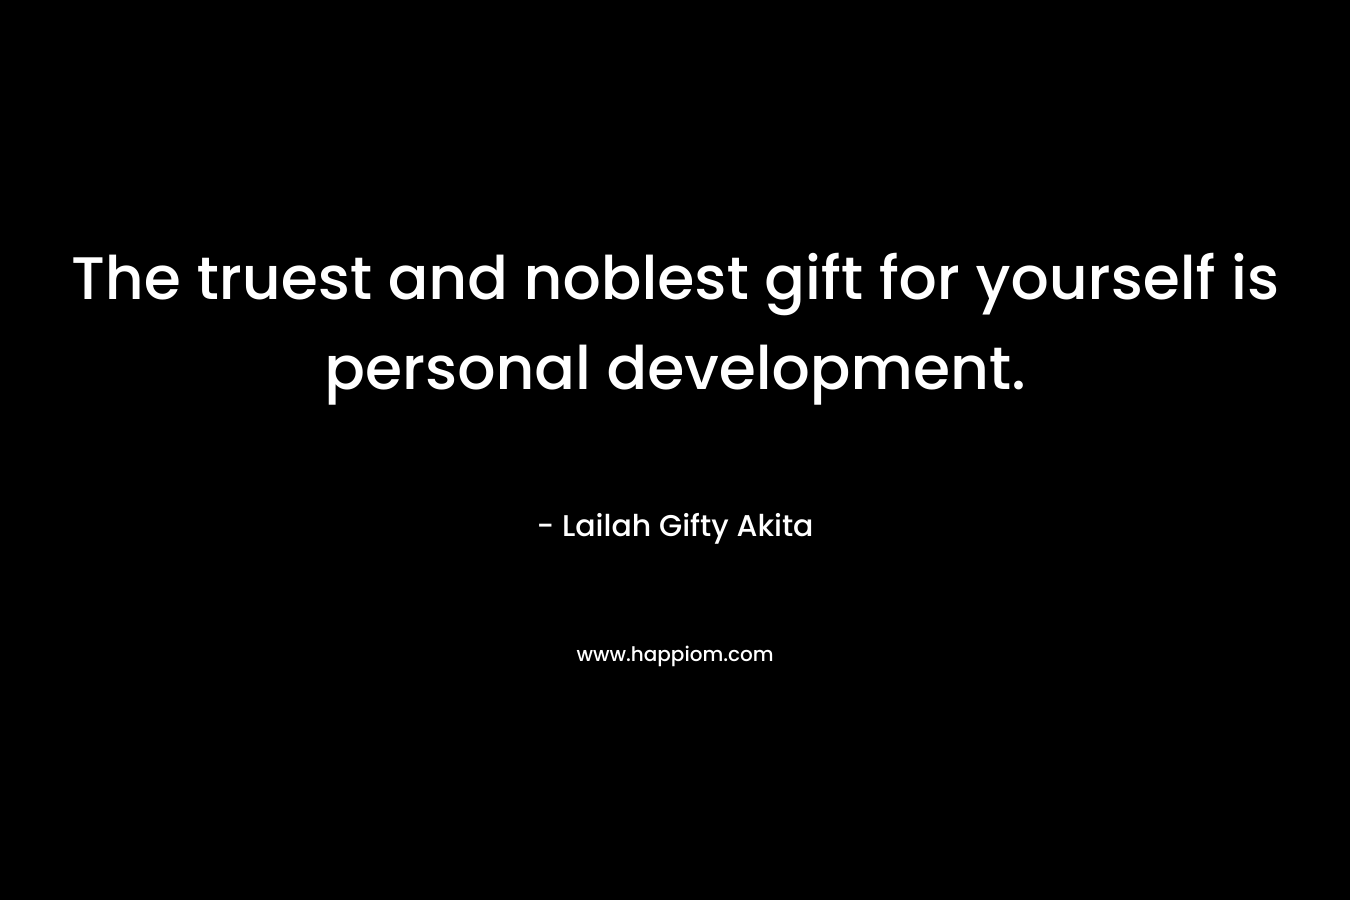 The truest and noblest gift for yourself is personal development. – Lailah Gifty Akita